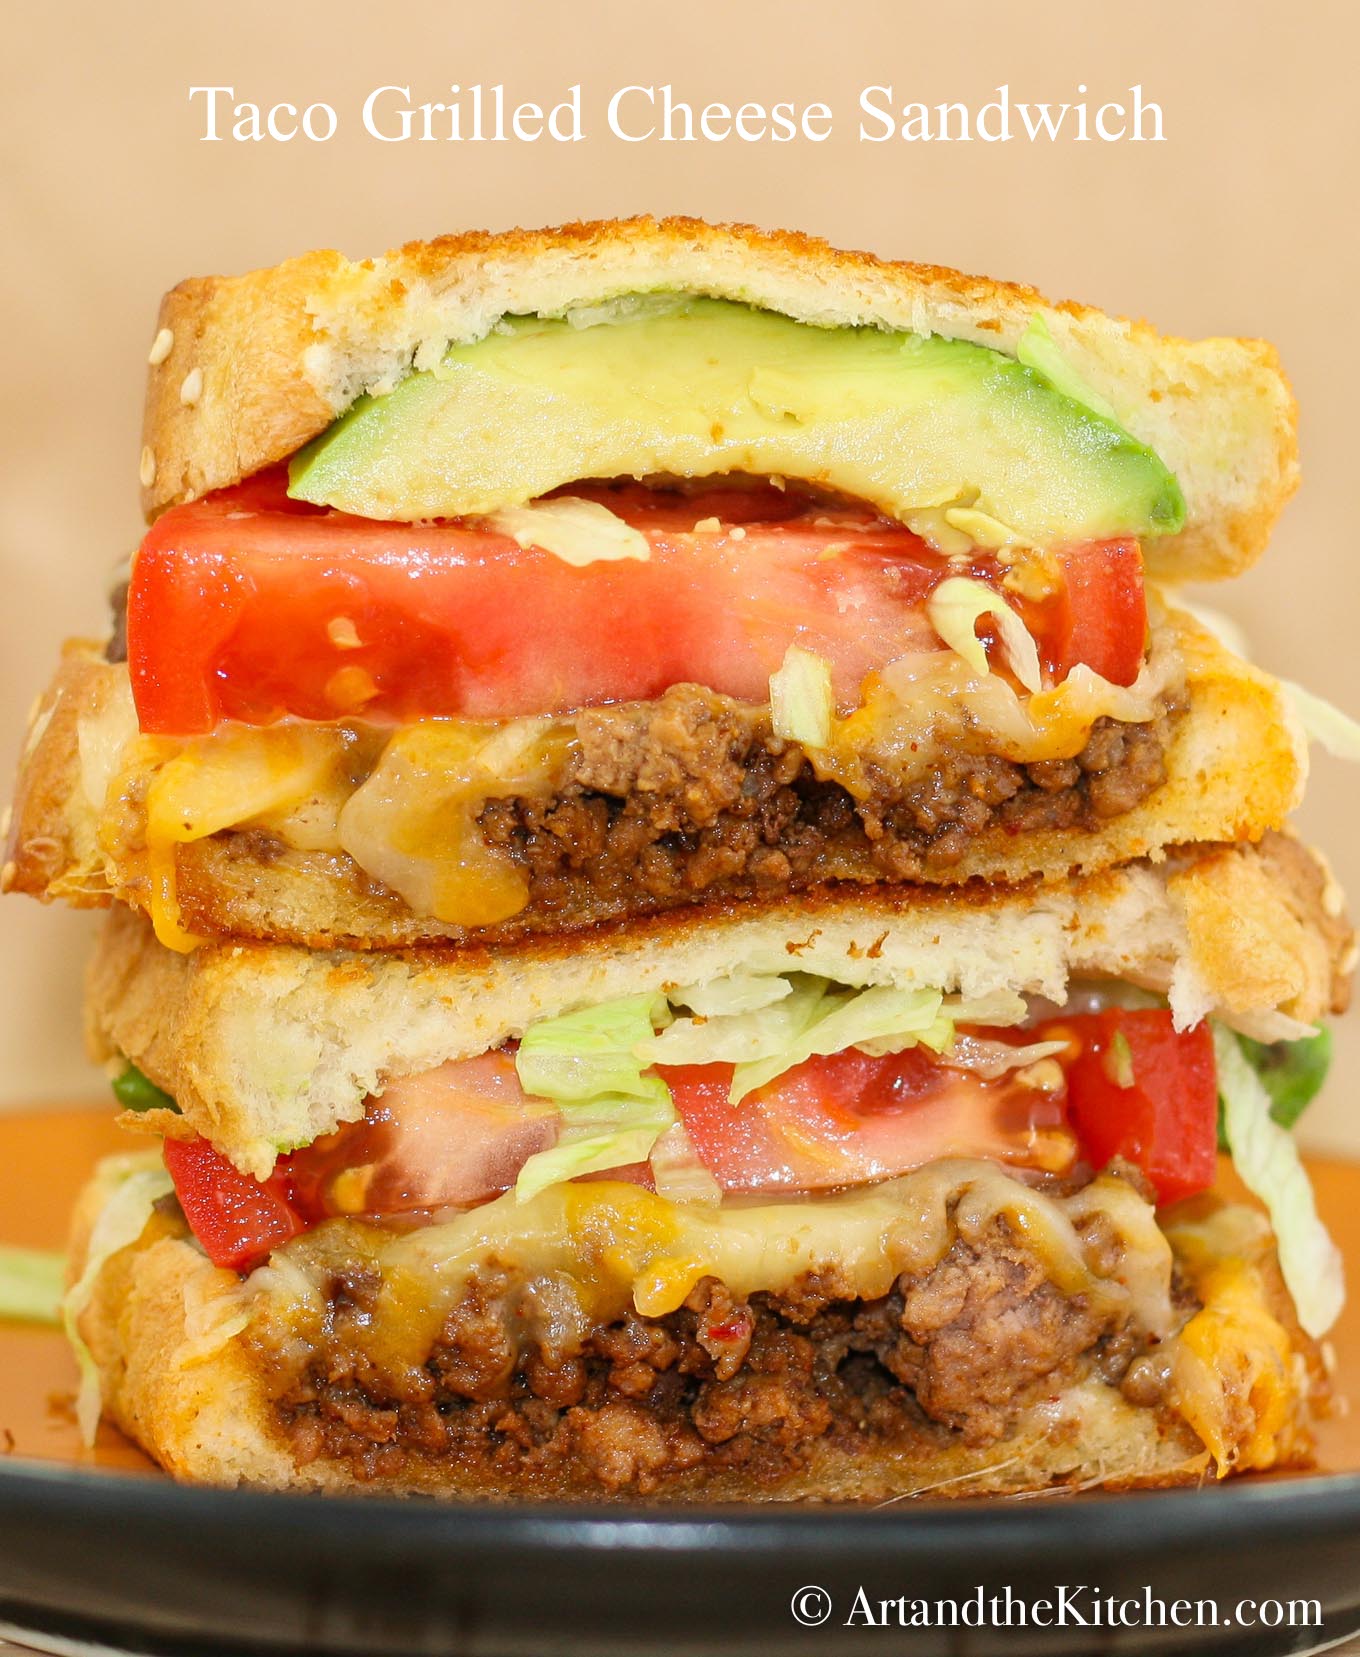 Taco Beef Grilled Cheese Sandwich